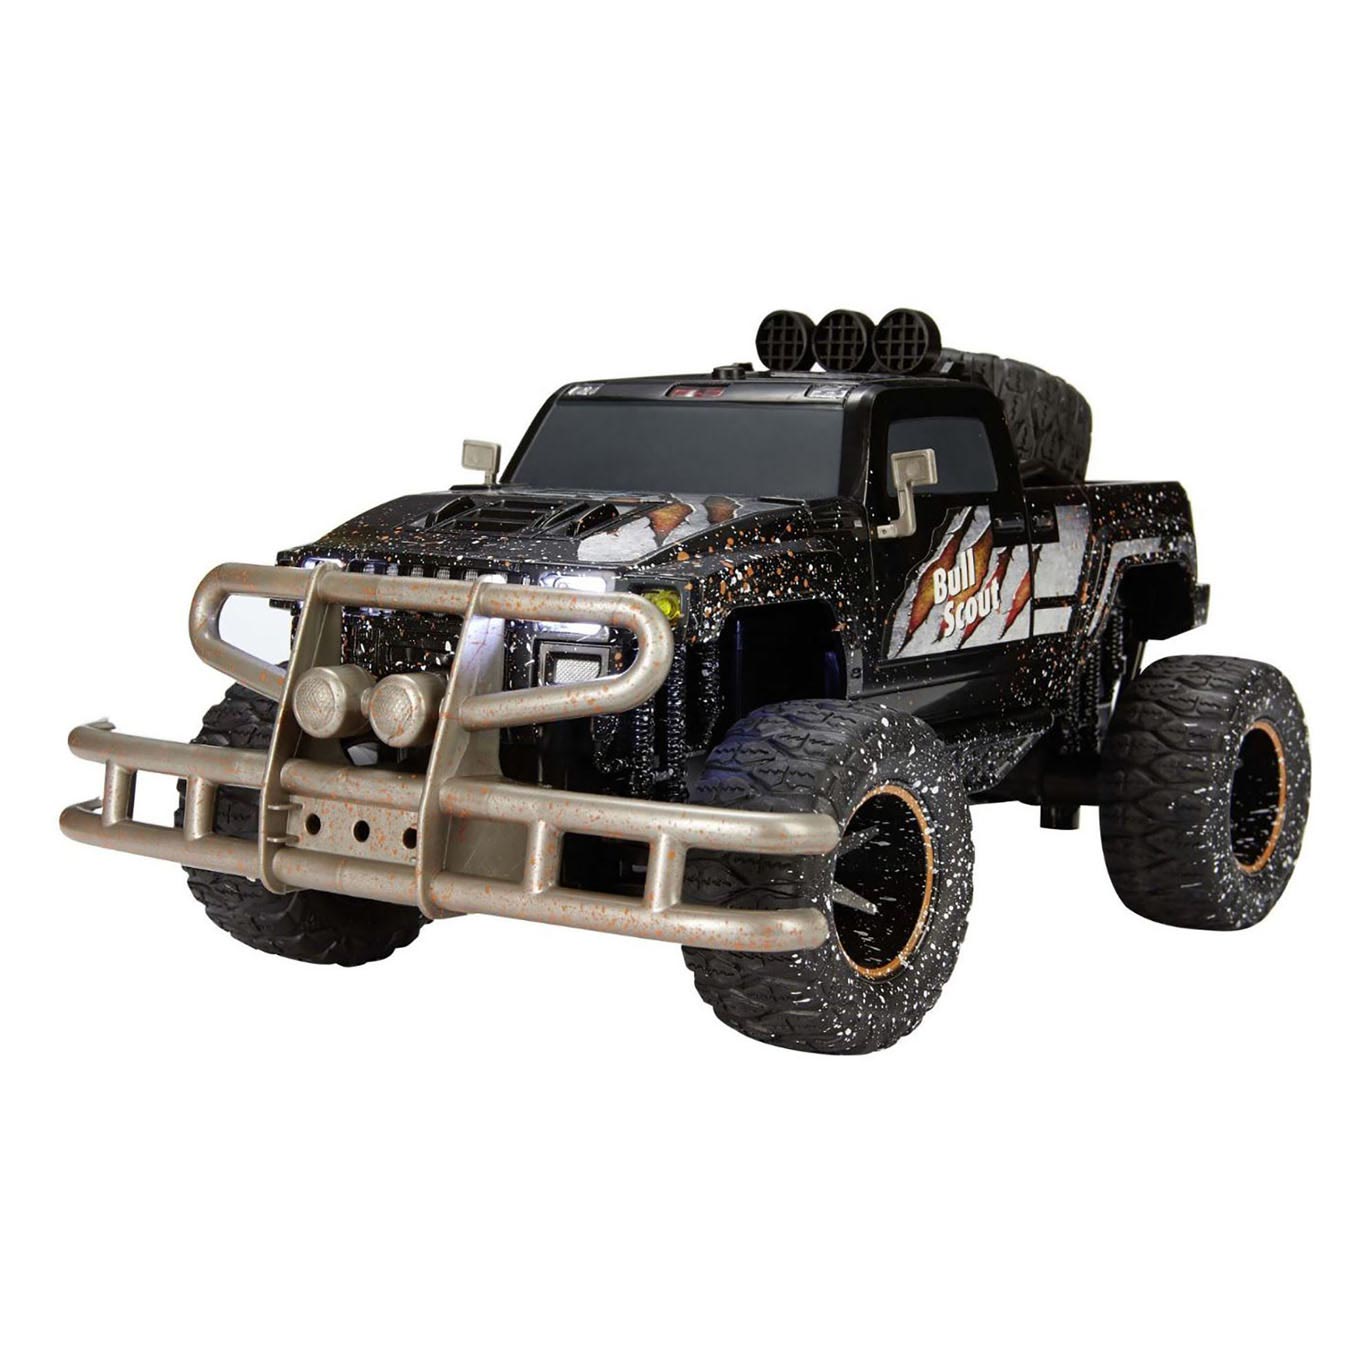 Voiture contrôlée Revell RC - Monster Truck Bull Scout